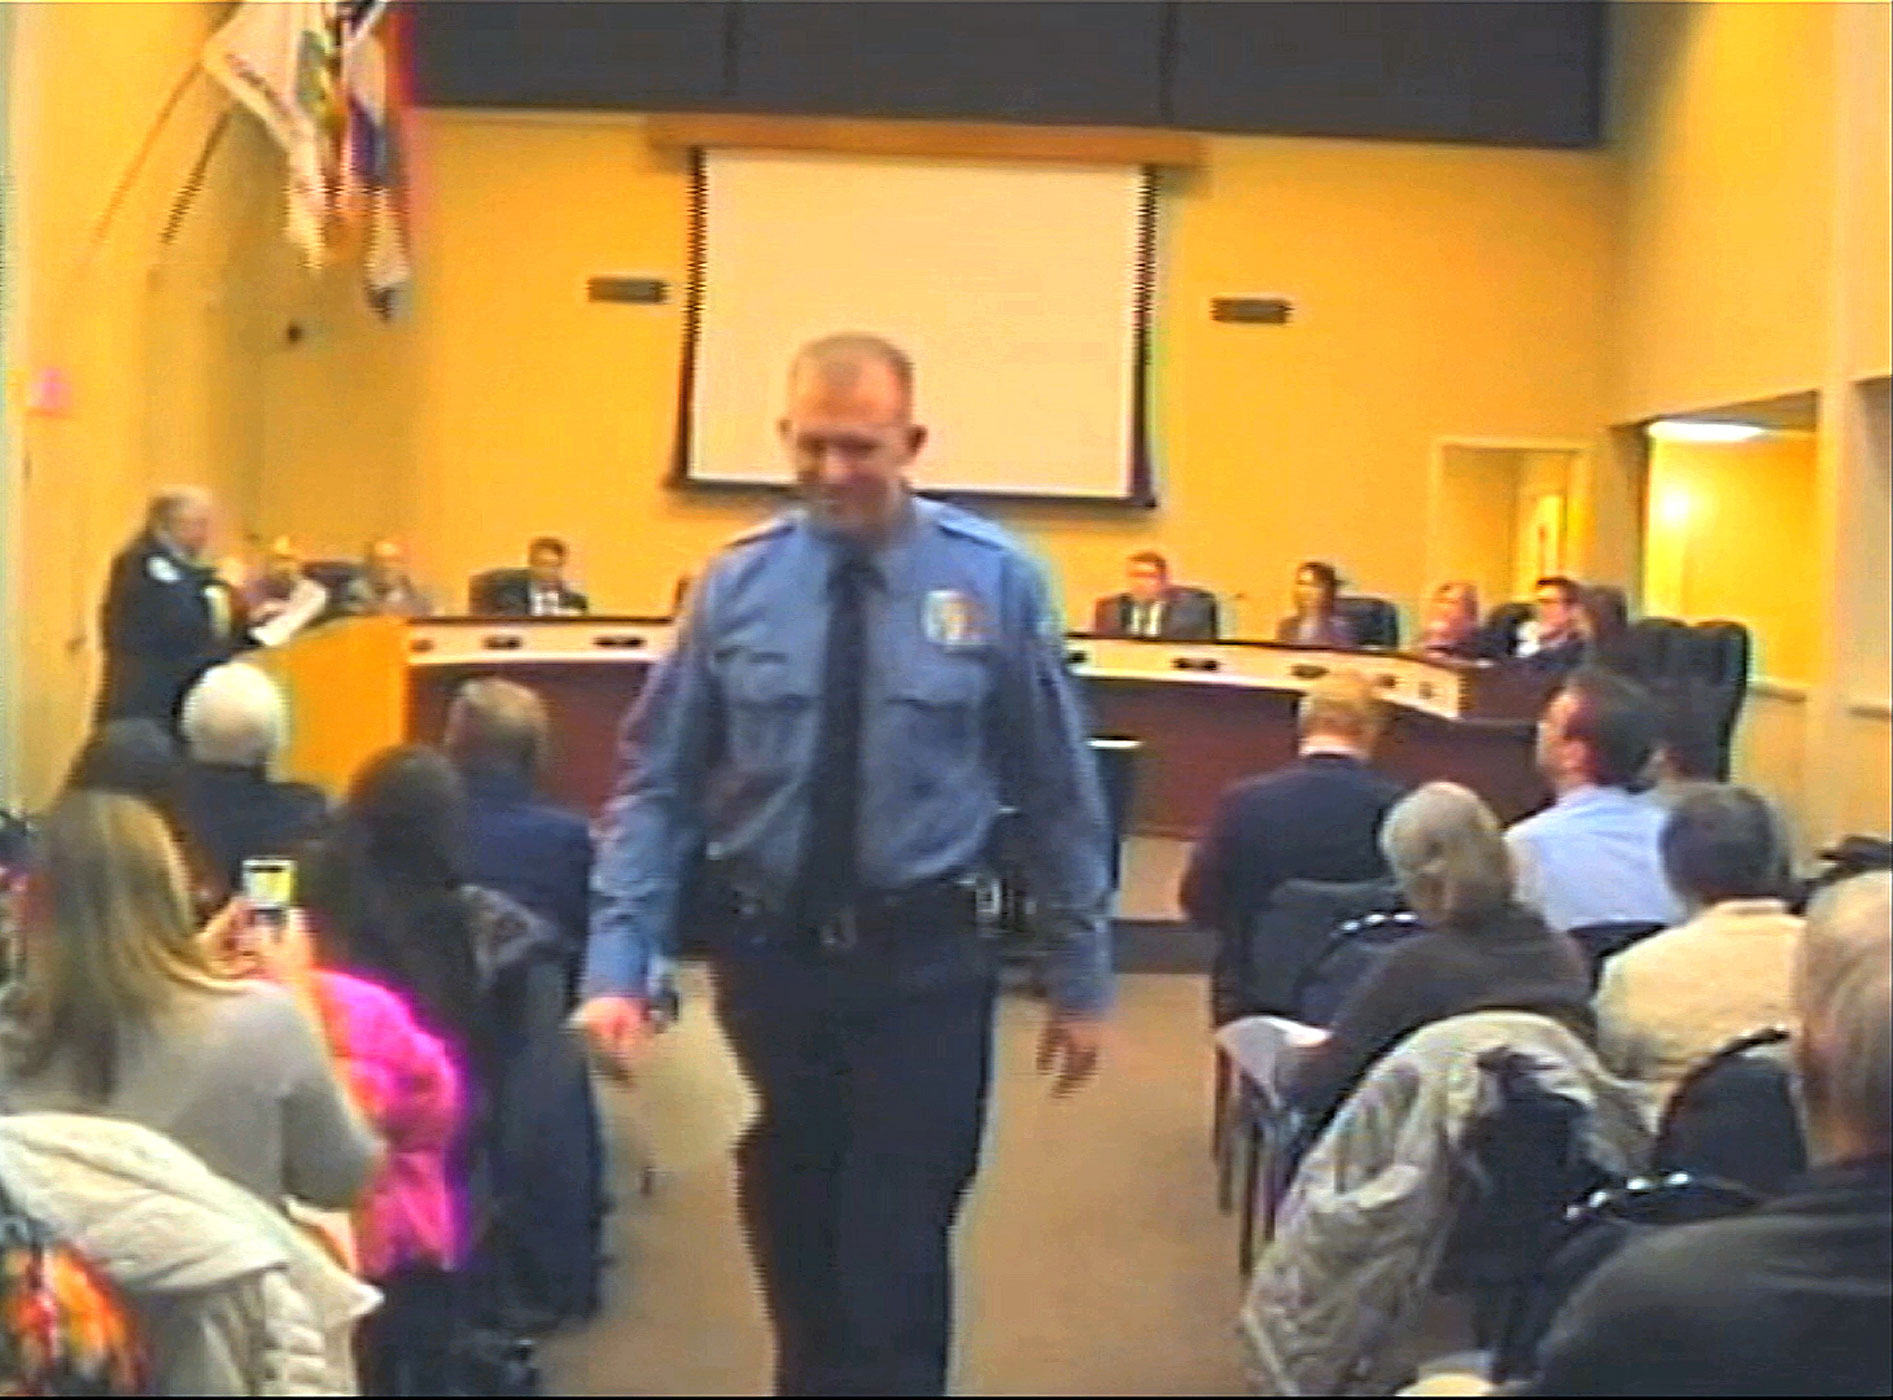 Officer Darren Wilson, seen in a video provided by the City of Ferguson, attends a city council meeting in Ferguson, Mo. (City of Ferguson/AP)